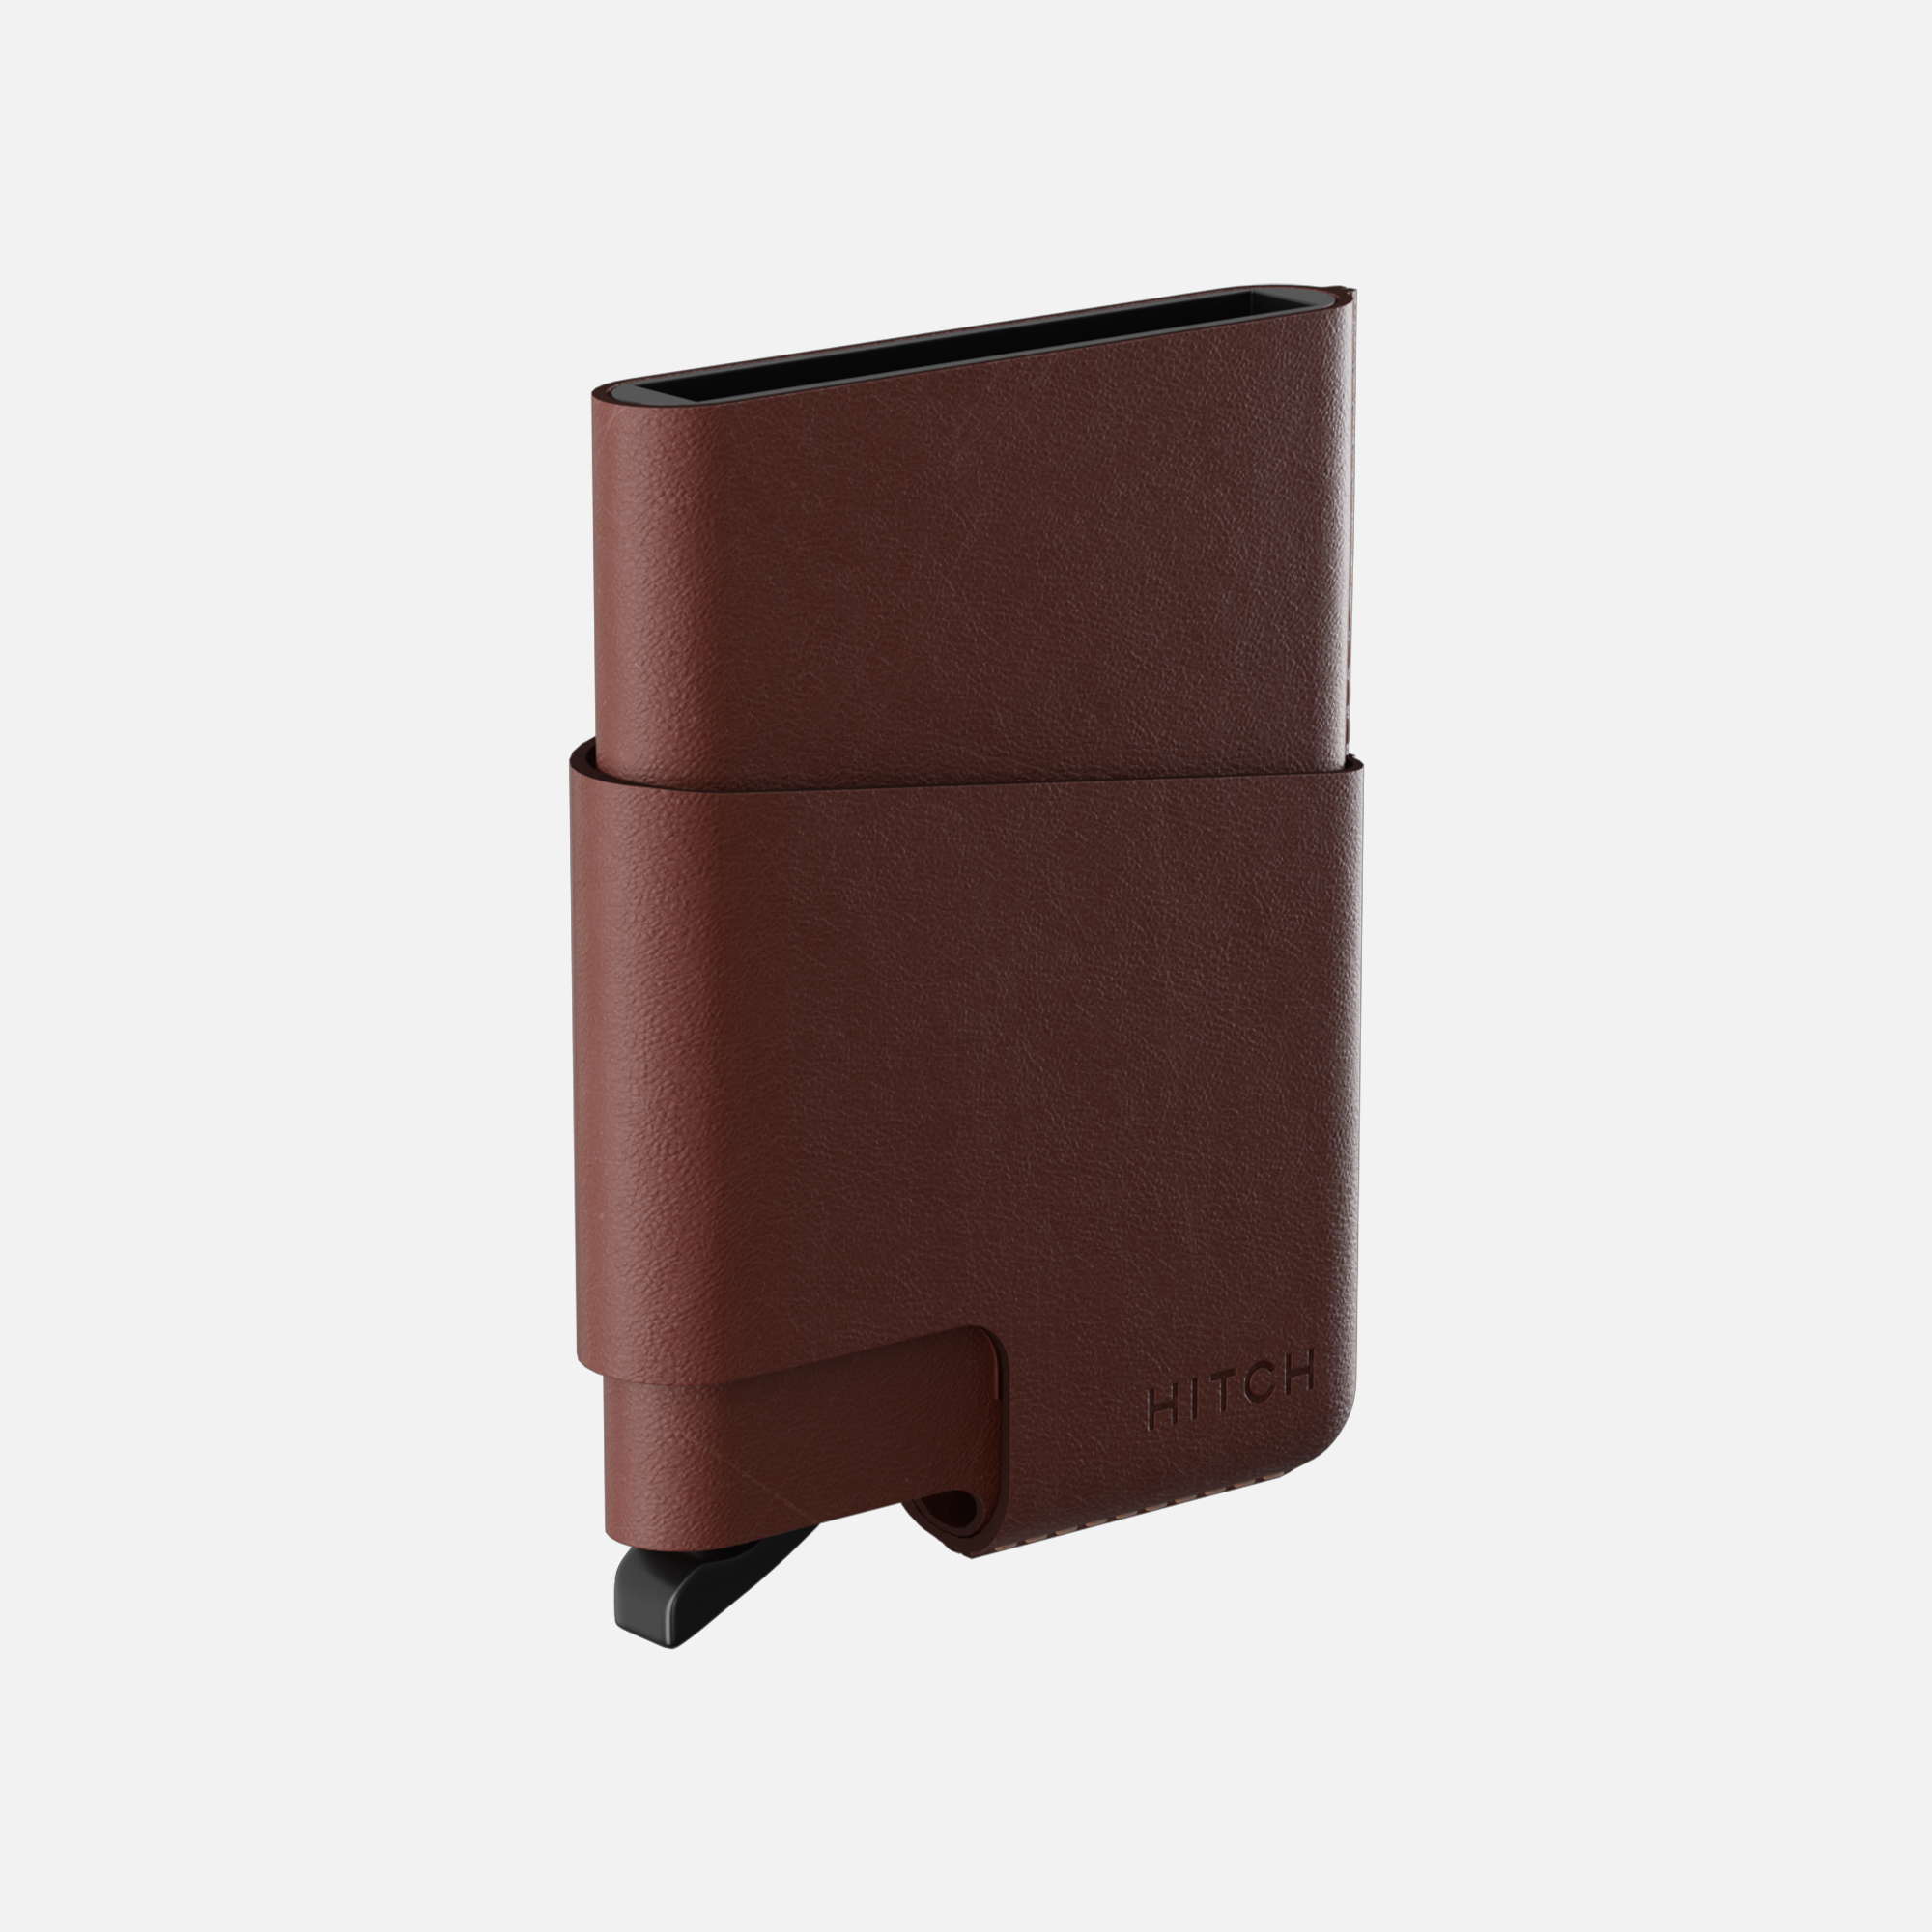 CUT-OUT Cardholder - RFID Block Featured - Handmade Natural Genuine Leather - Coffee Brown